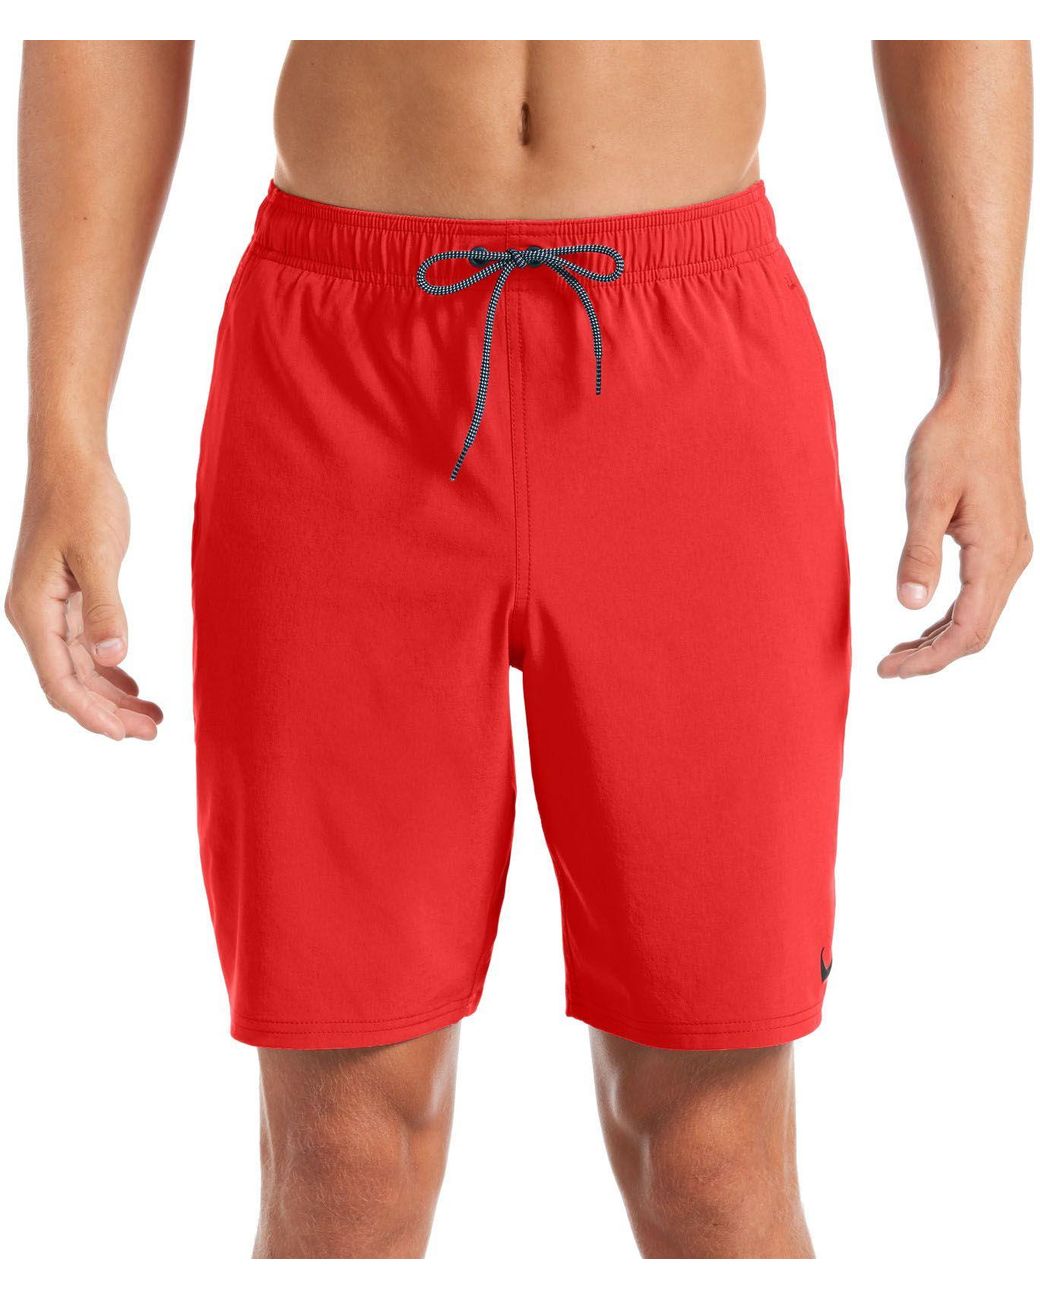 Nike Contend Volley Swim Trunks in University Red (Red) for Men - Lyst